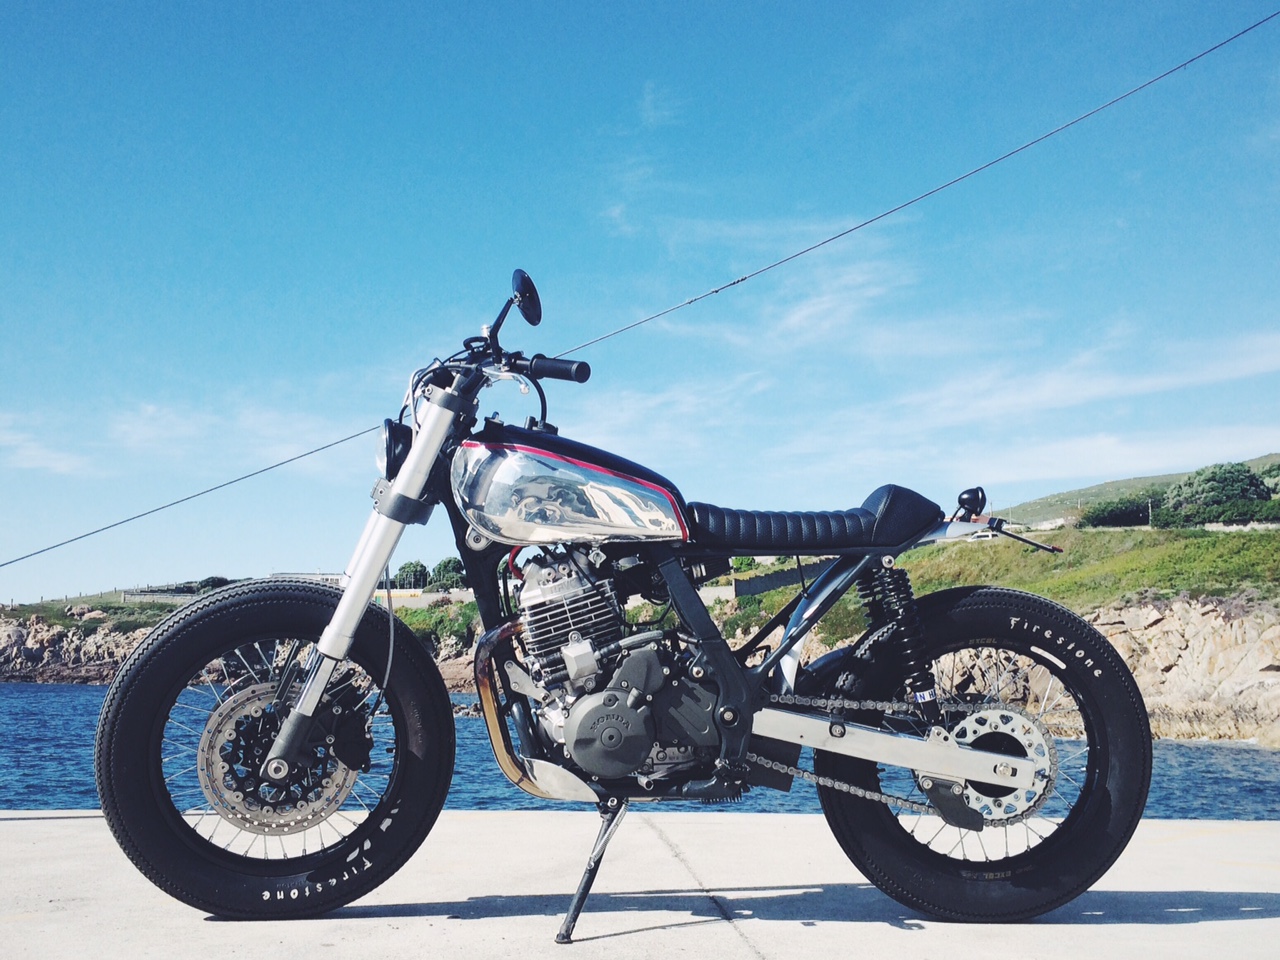 NX650 Tracker by Is Not a Crime